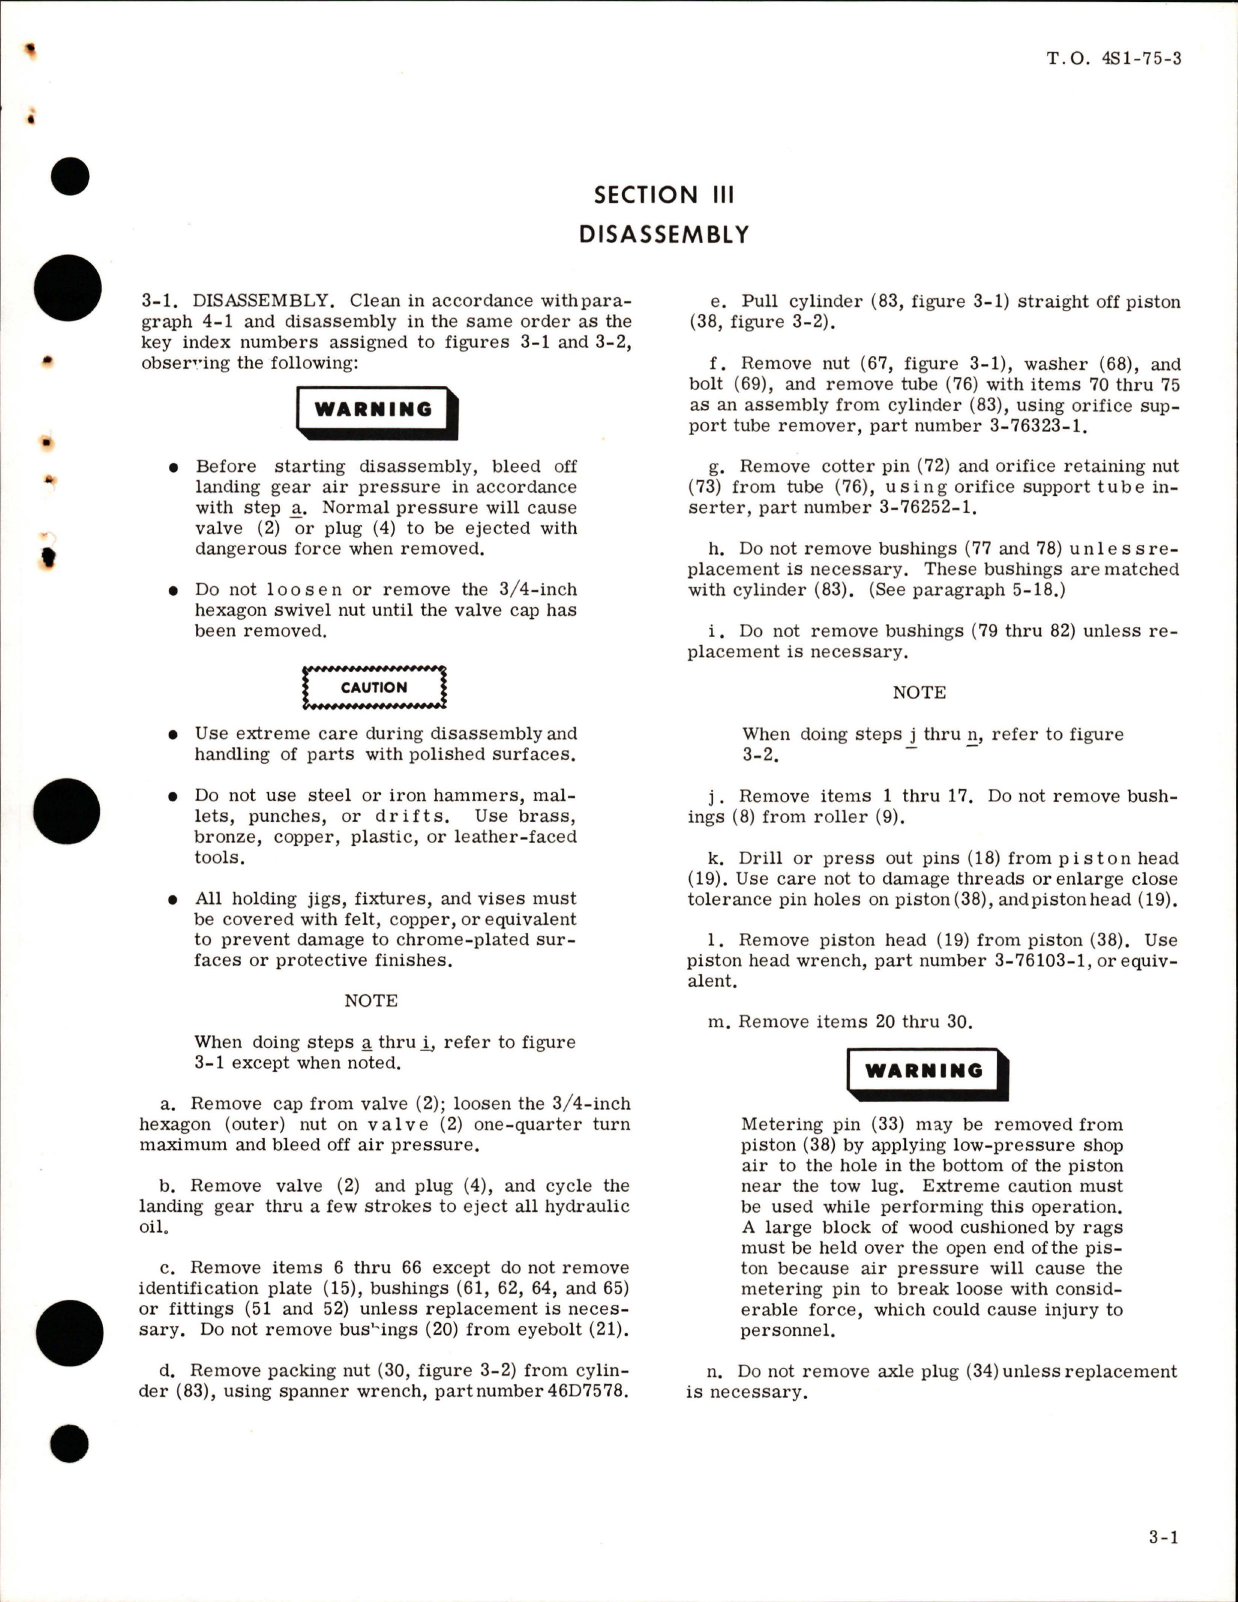 Sample page 9 from AirCorps Library document: Overhaul Instructions for Retractable Landing Gear